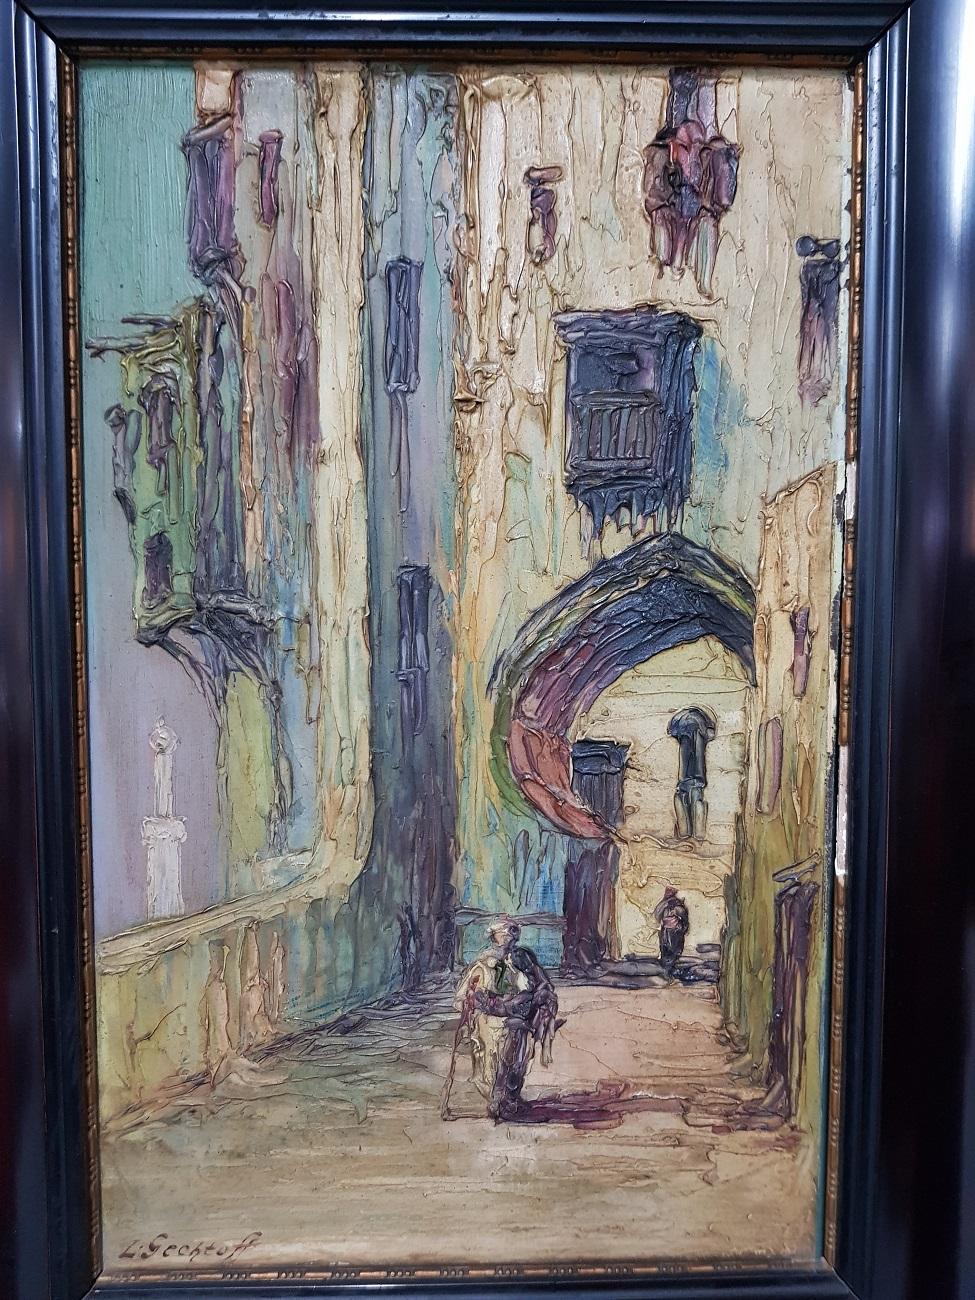 Oriental street scene with port and people and is painted in the late 1930s by the American Leonid Gechtoff (1883-1941) signature bottom left, the frame has some damage around.

The measurements are including Frame,
Depth 6 cm/ 2.3 inch.
Width 44